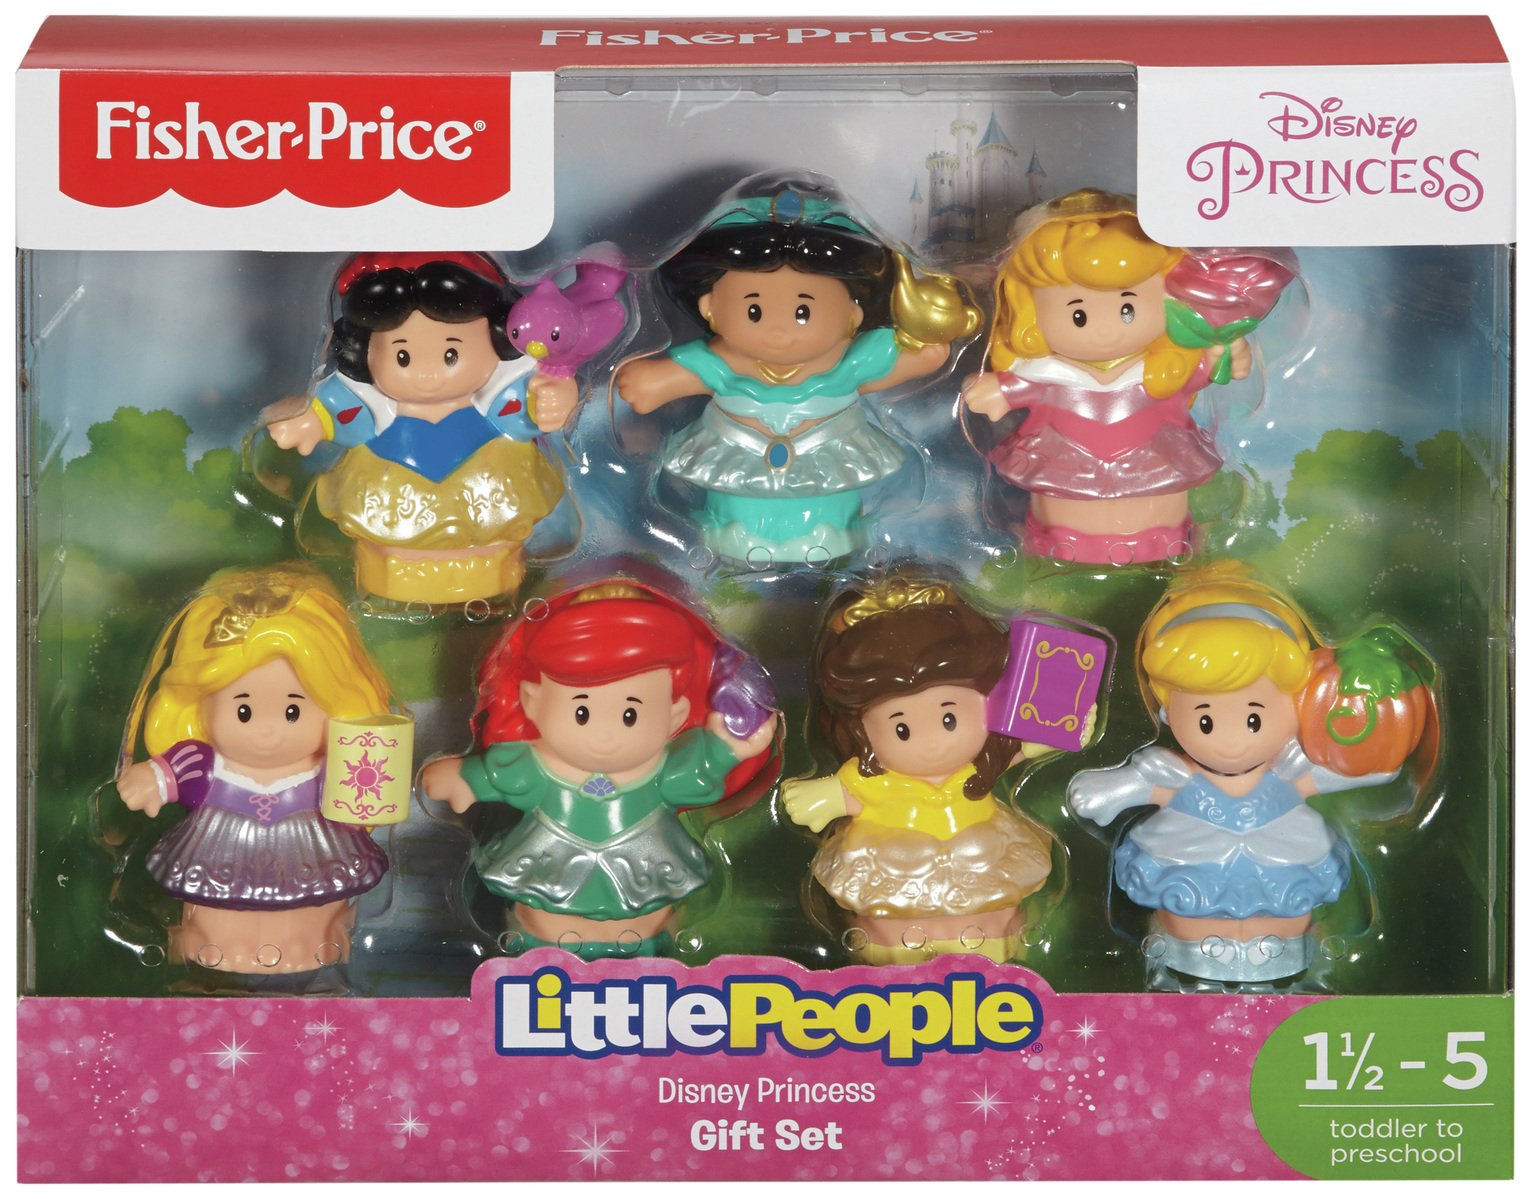 Fisher-Price World of Little People/Disney Princess Figures Review